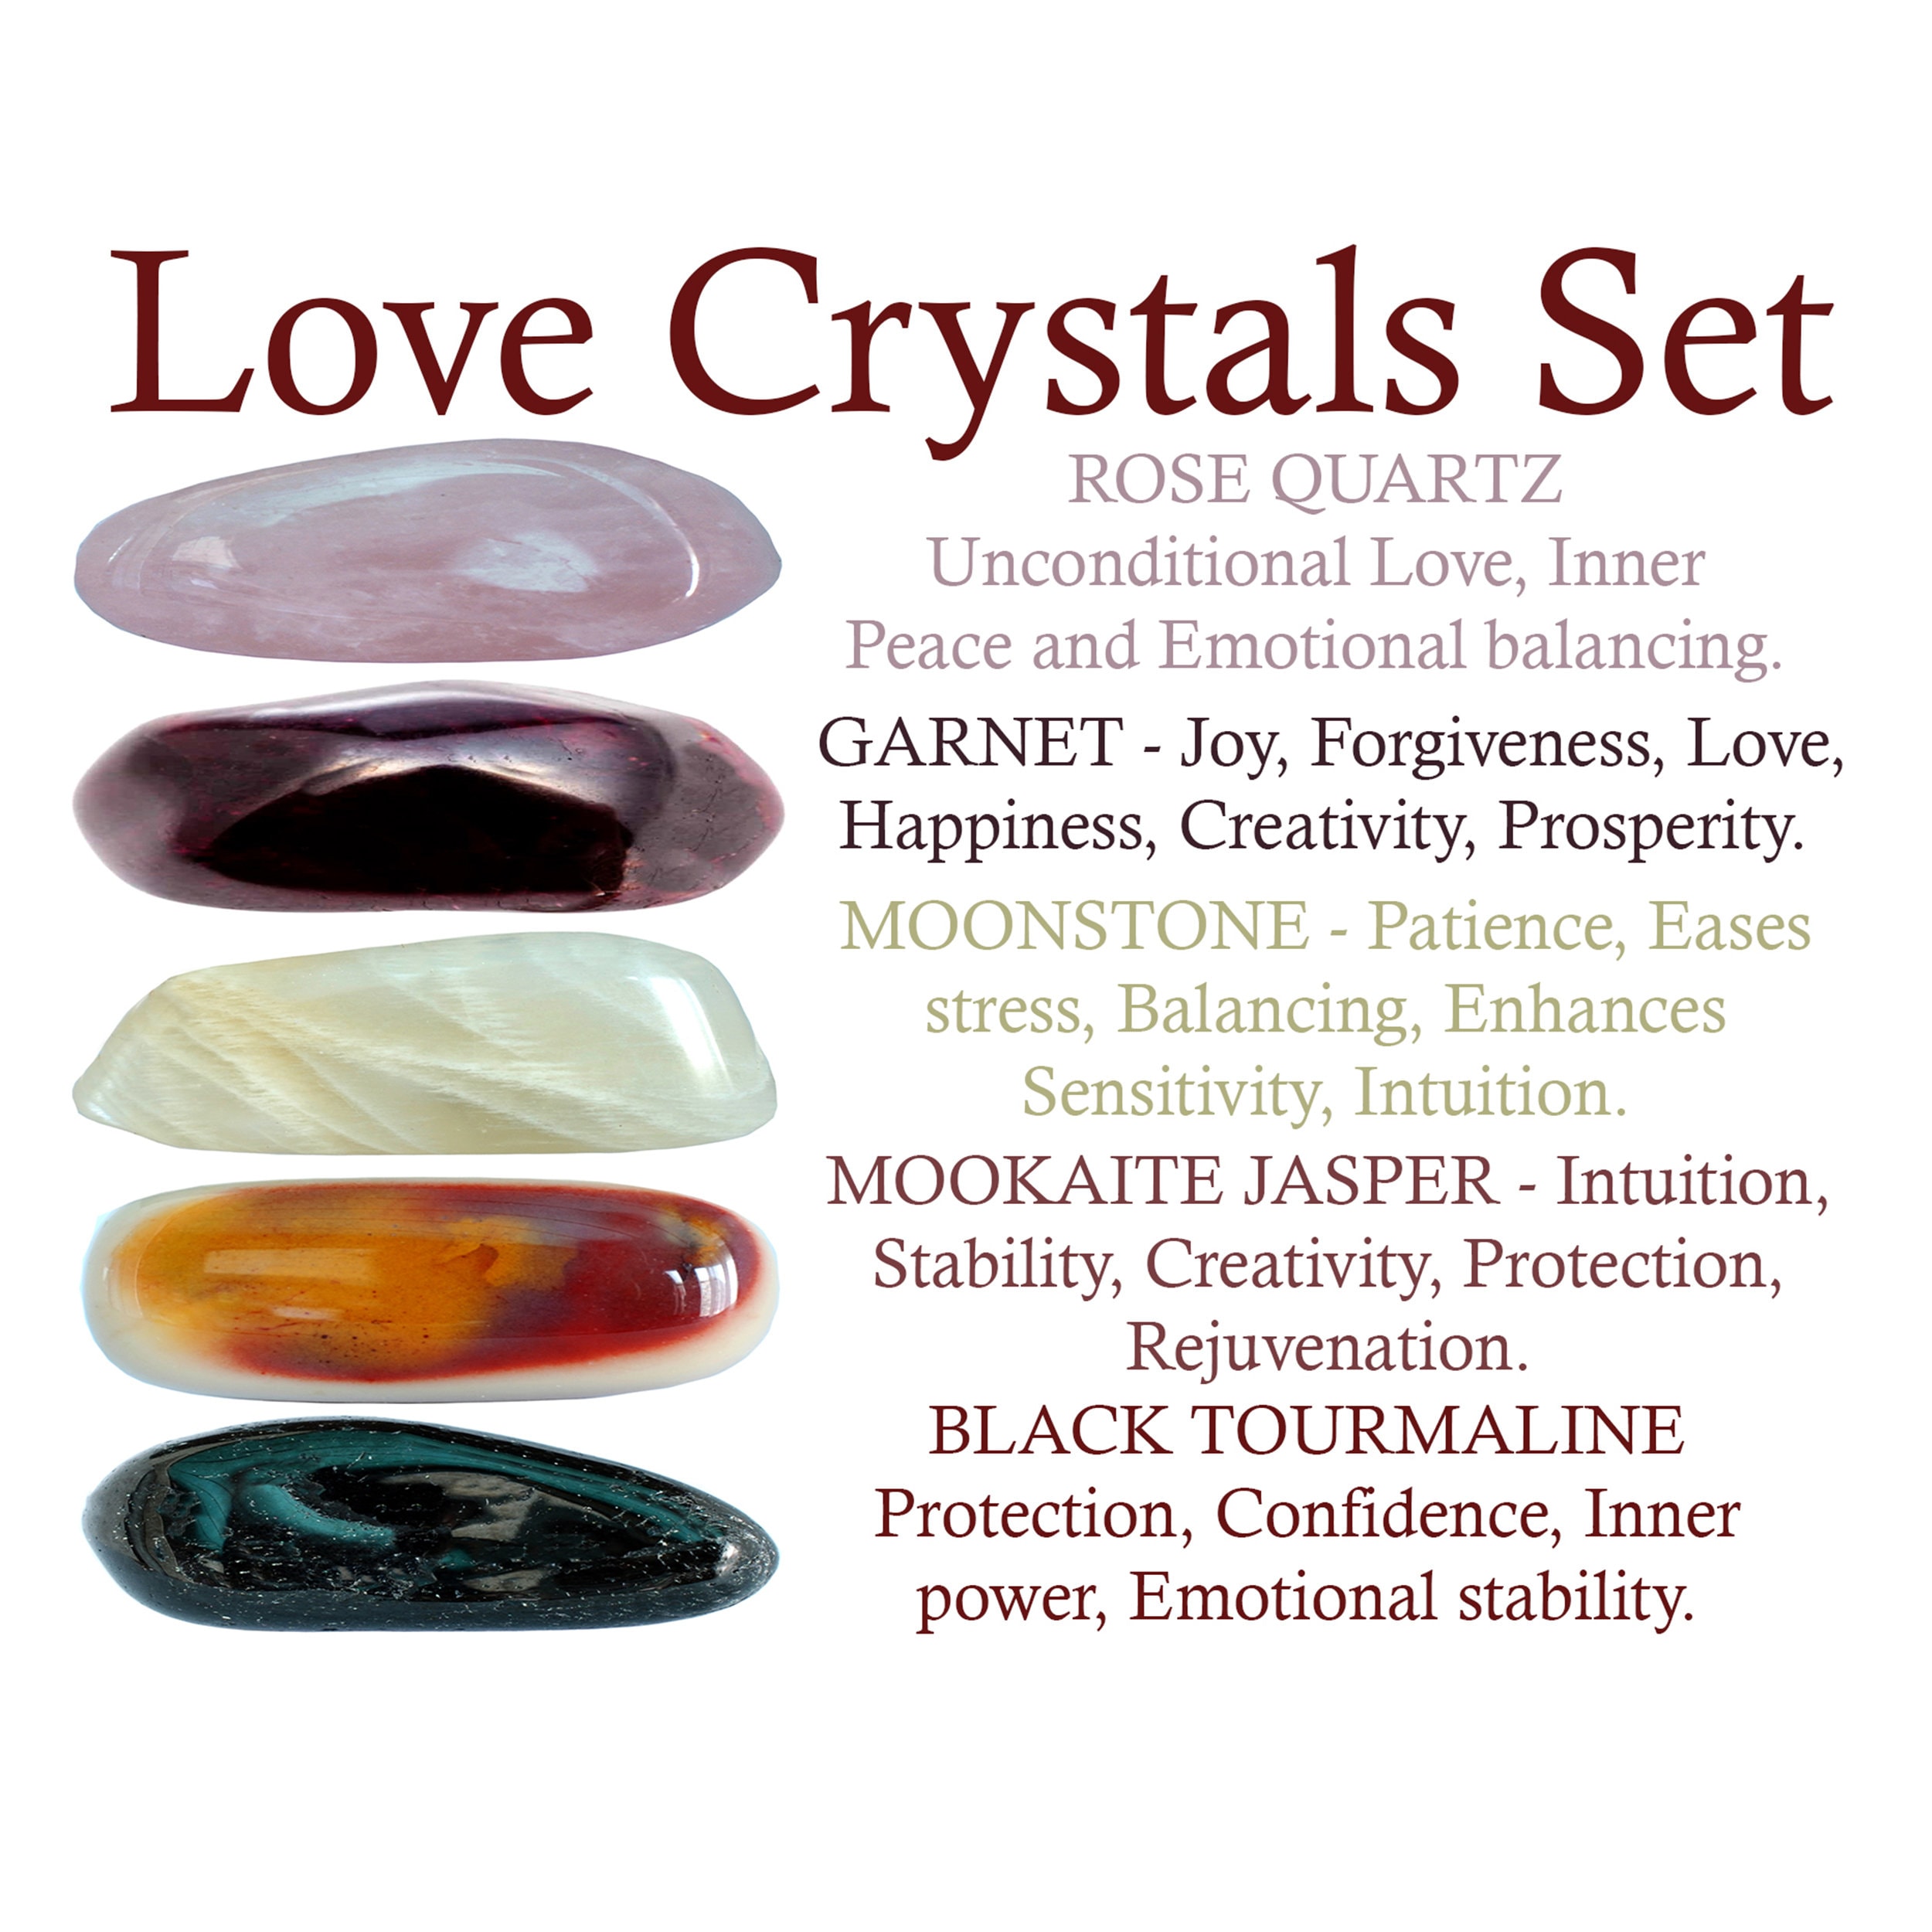 Stress Relief Crystal Box - Bracelet, Worry Stone, Quartz Point, Tumble and  Rough Stones Combo Box (CRAZY VALUE, Stress Reduction Crystals)